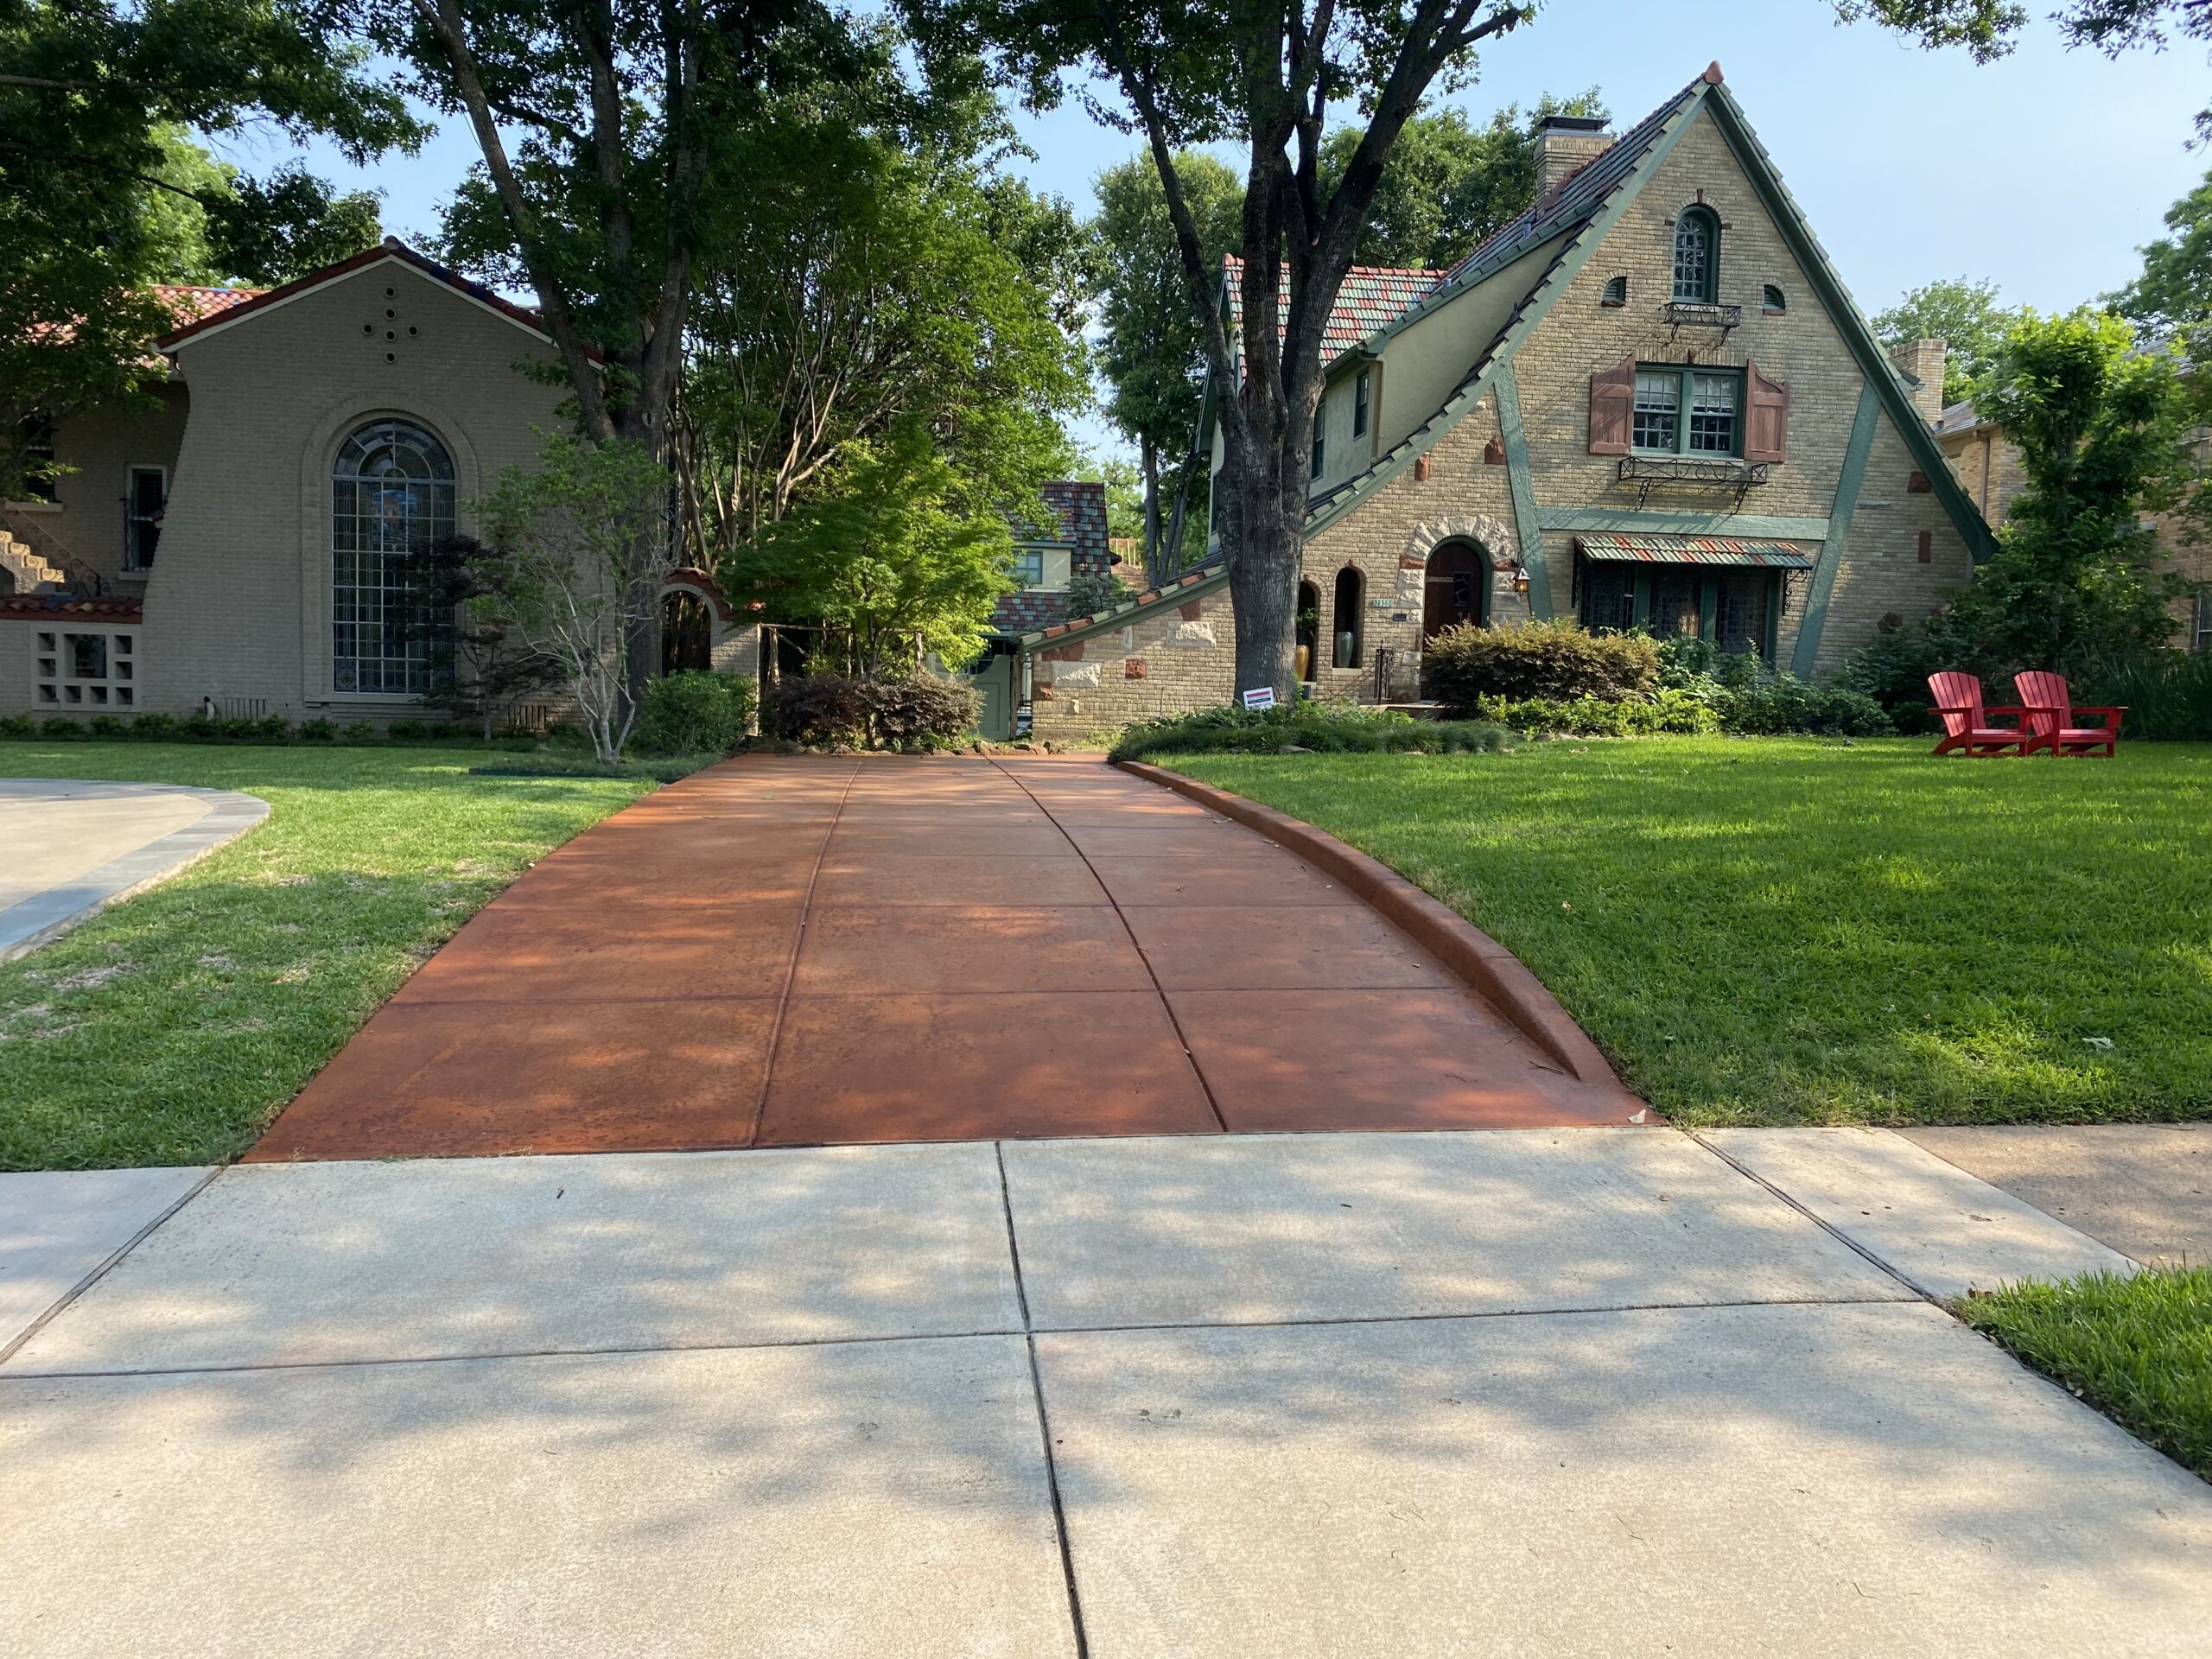 Tangerine ColorWave water-based stain on scored concrete driveway